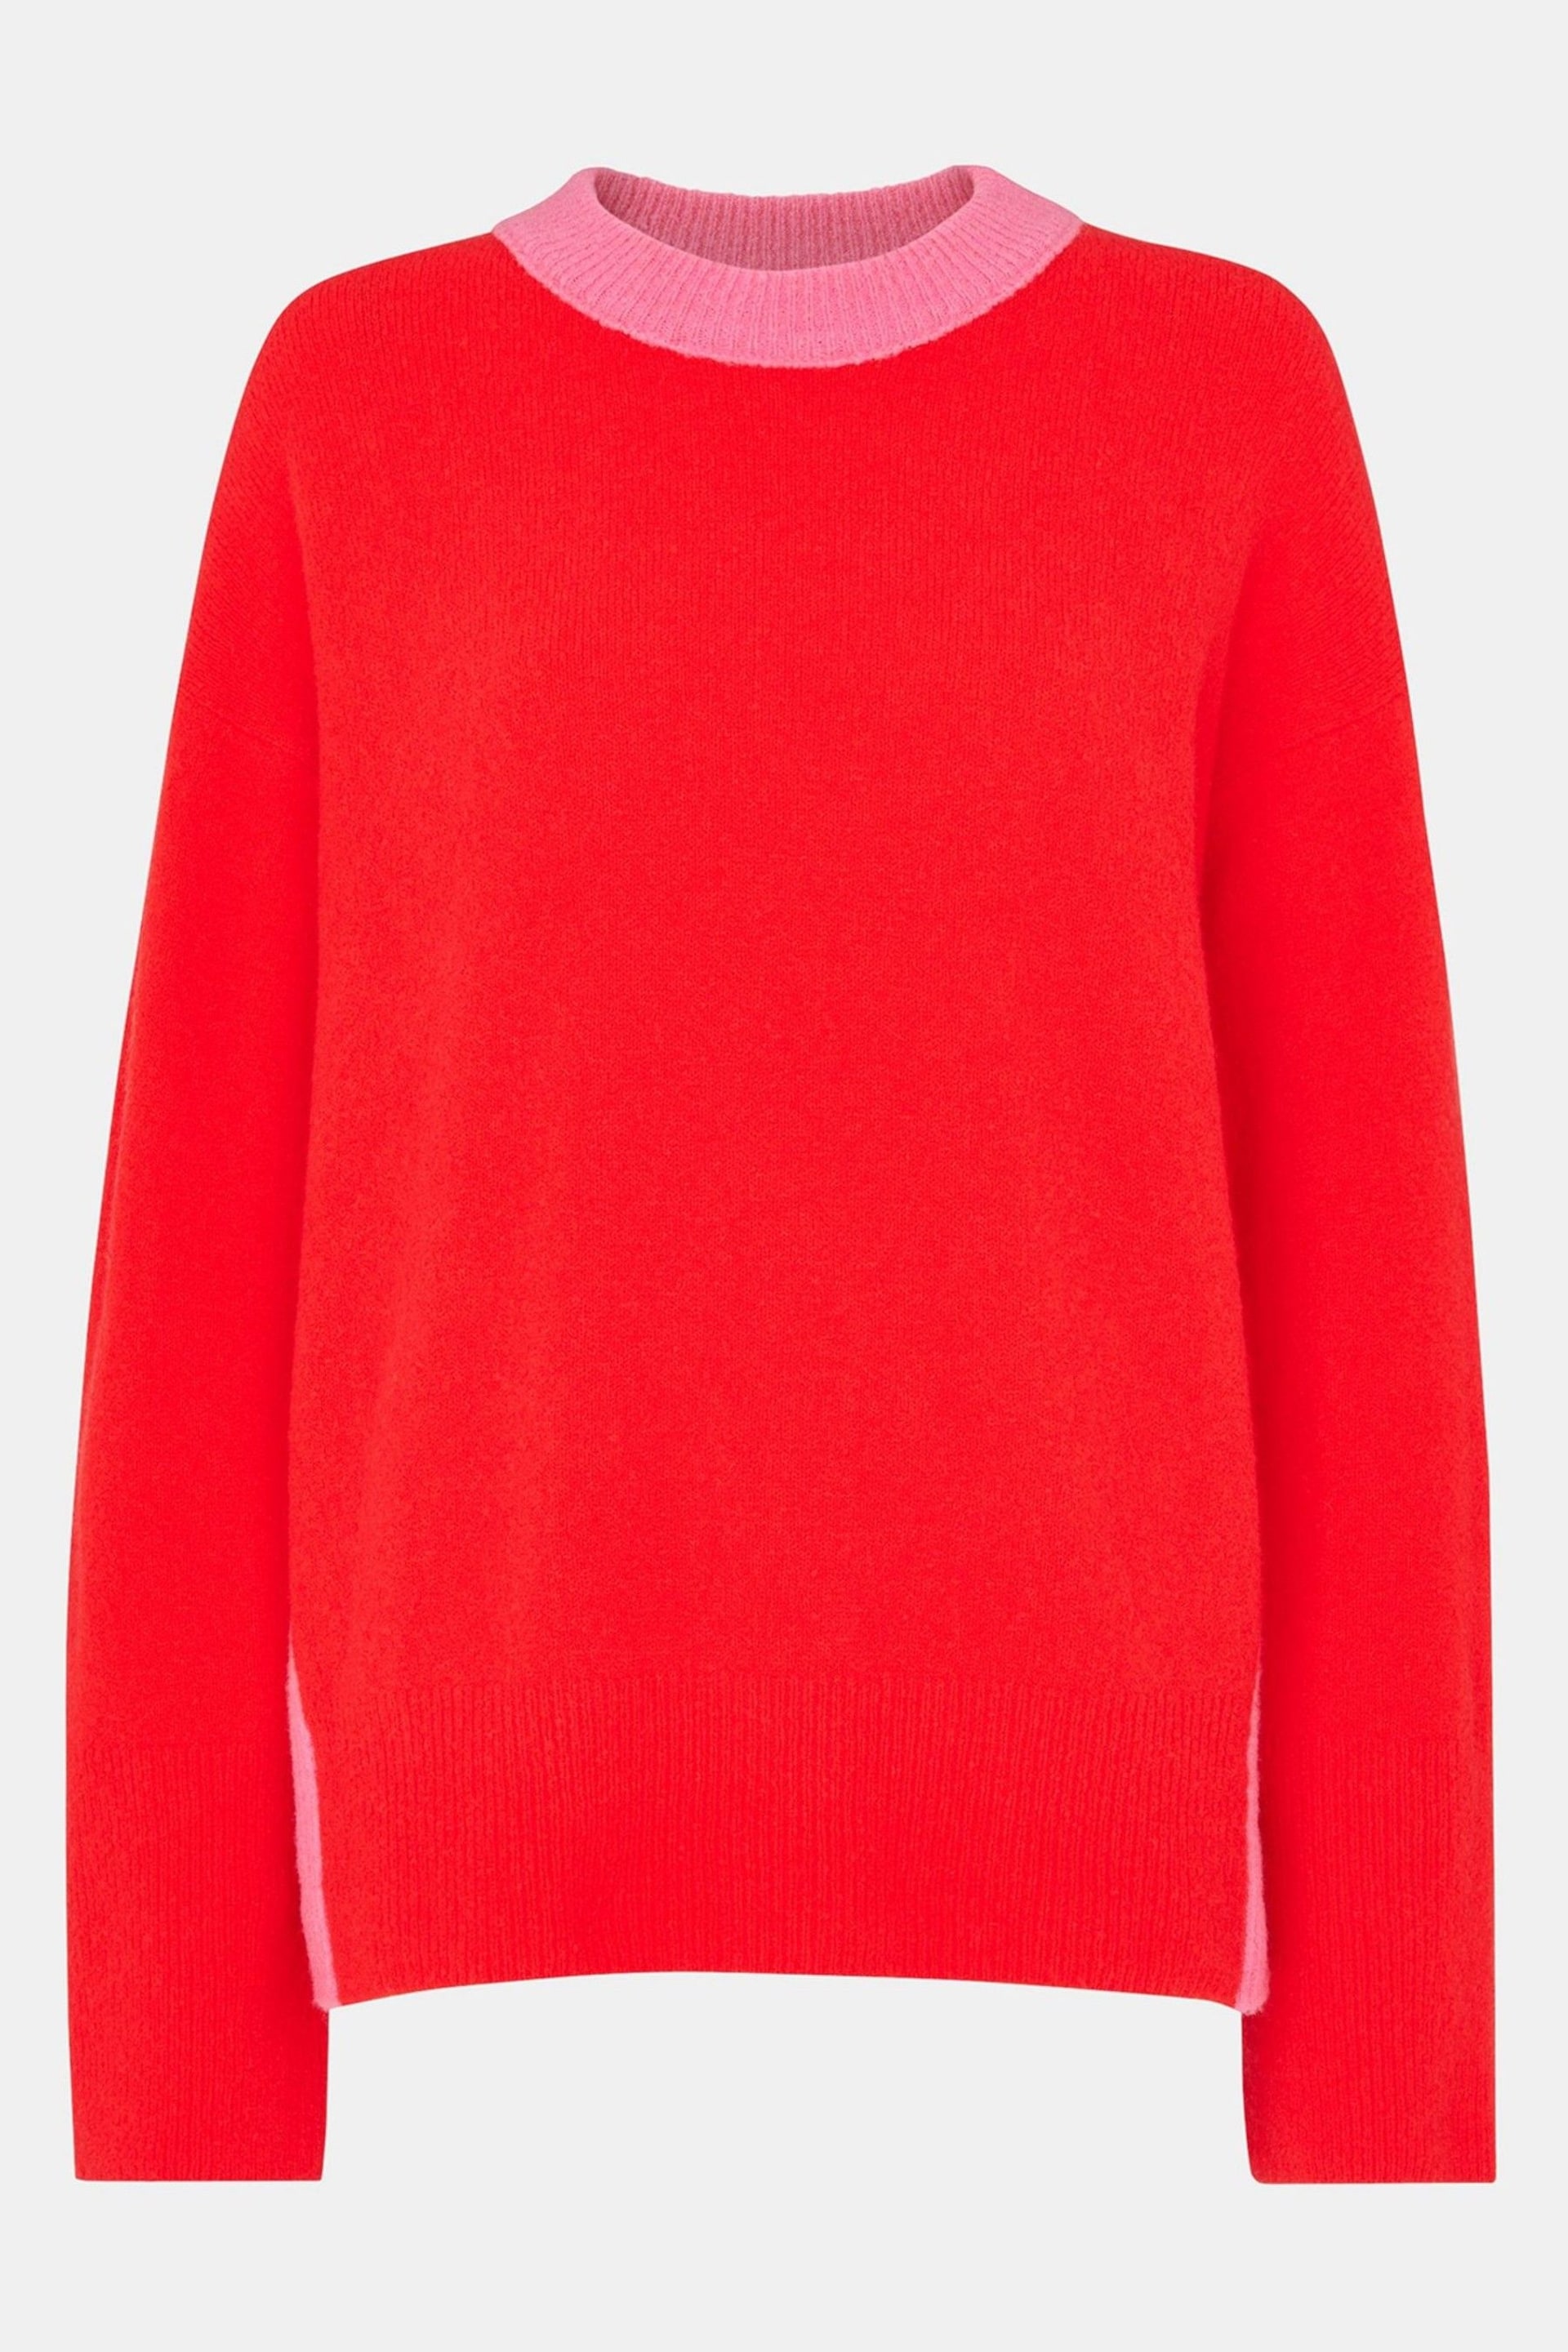 Whistles Red Colourblock Crew Neck Knit Jumper - Image 5 of 5